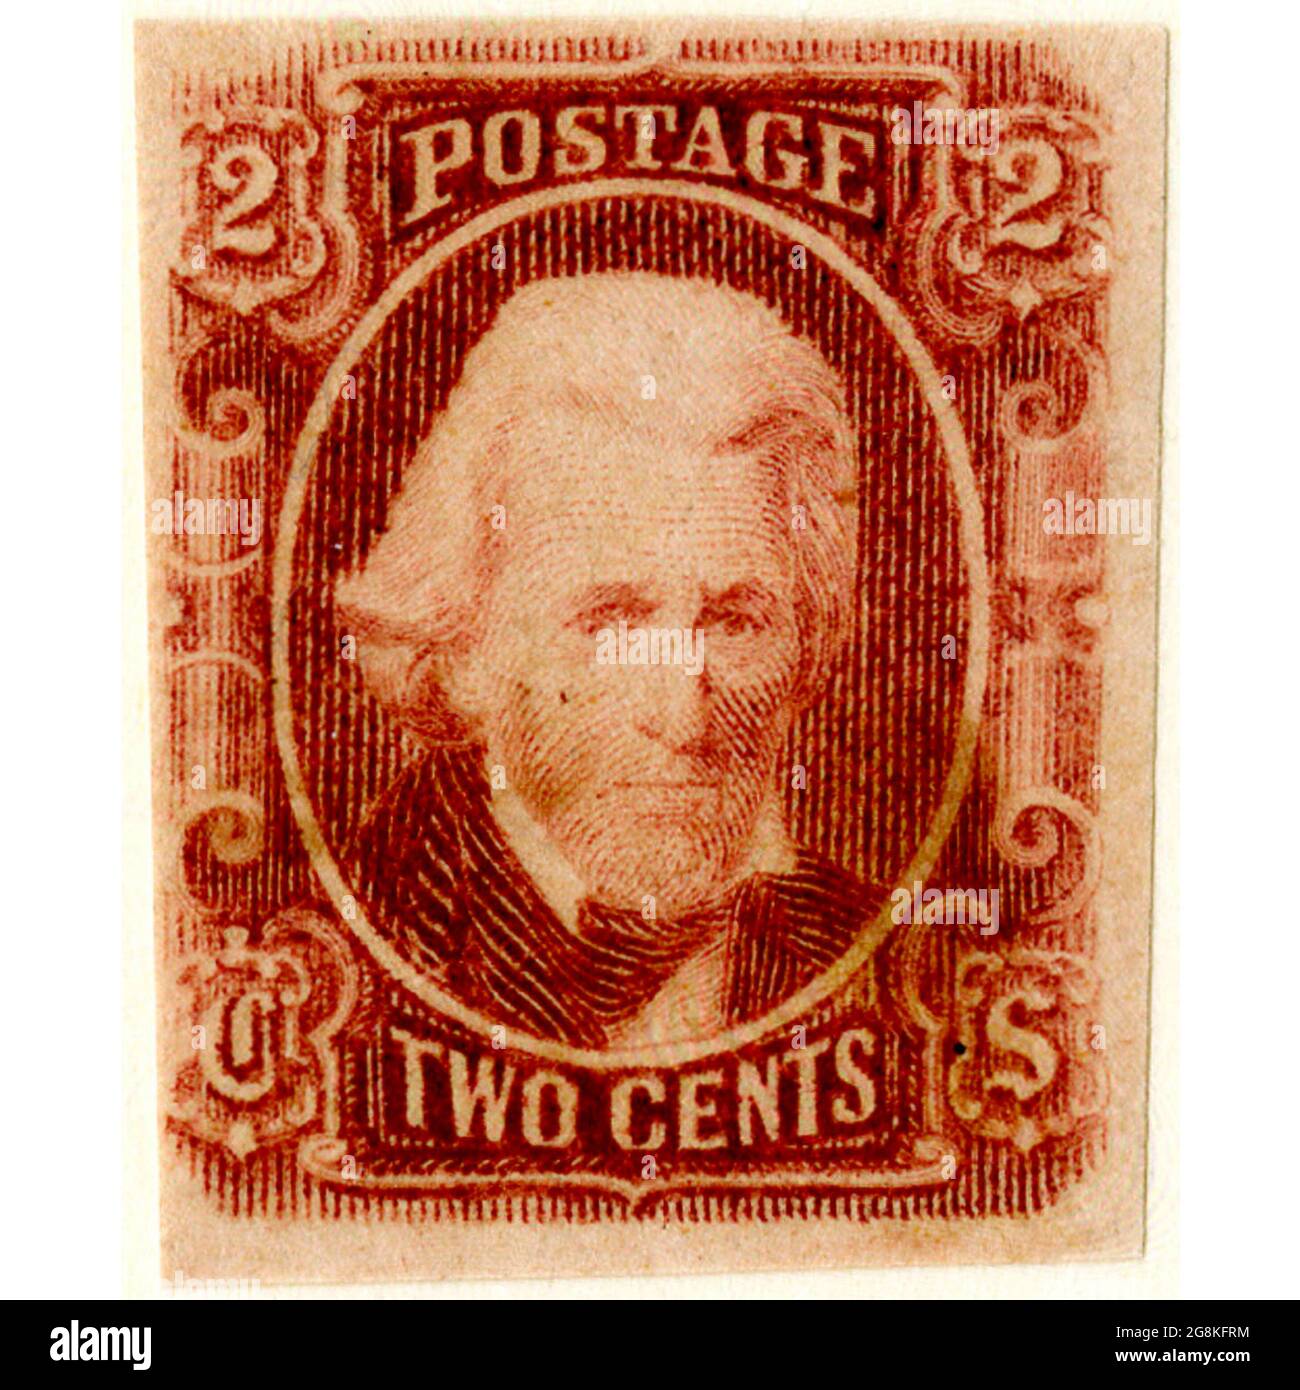 Confederate postage stamps, two cent brown red, general issue 1863, type 8. Postage stamp depicts Andrew Jackson printed in brown red. Postal service of the Confederate States of America. Richmond, Va. : Dietz Printing Co., 1929. Stock Photo